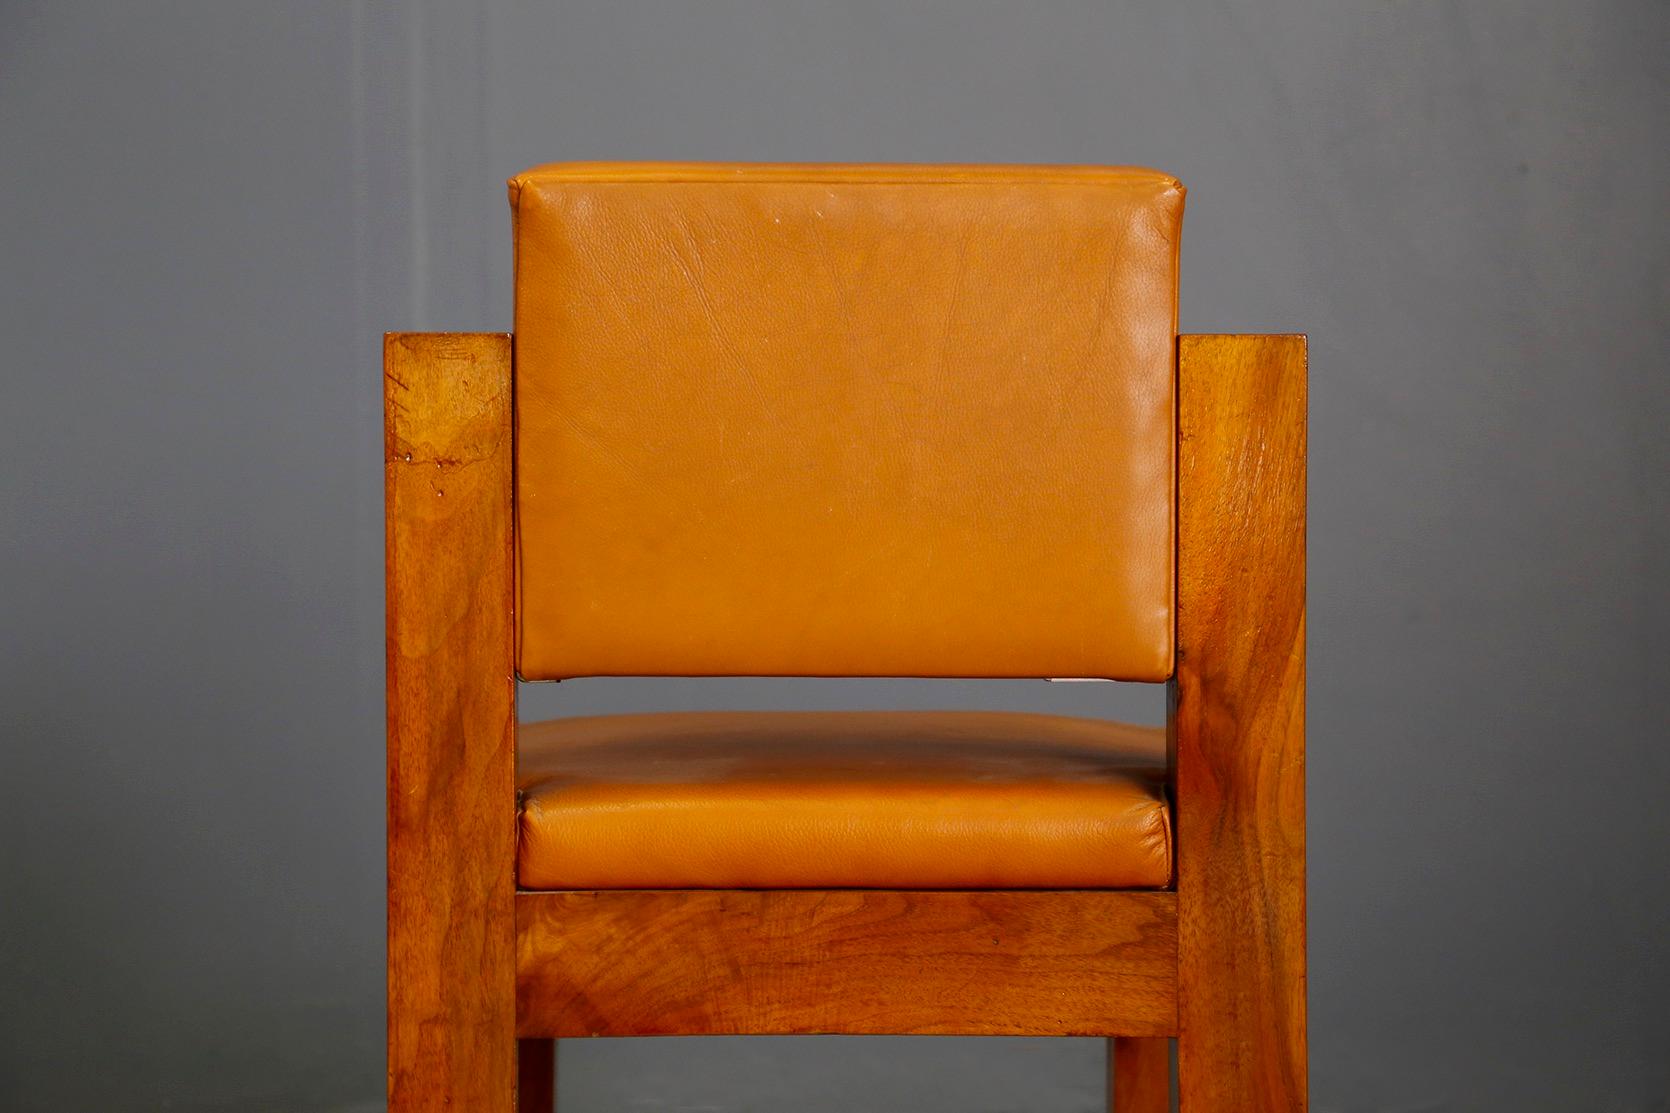 Early 20th Century Italian Armchair Rationalist by Mansutti and Miozzo Architects Numbered, 1920s